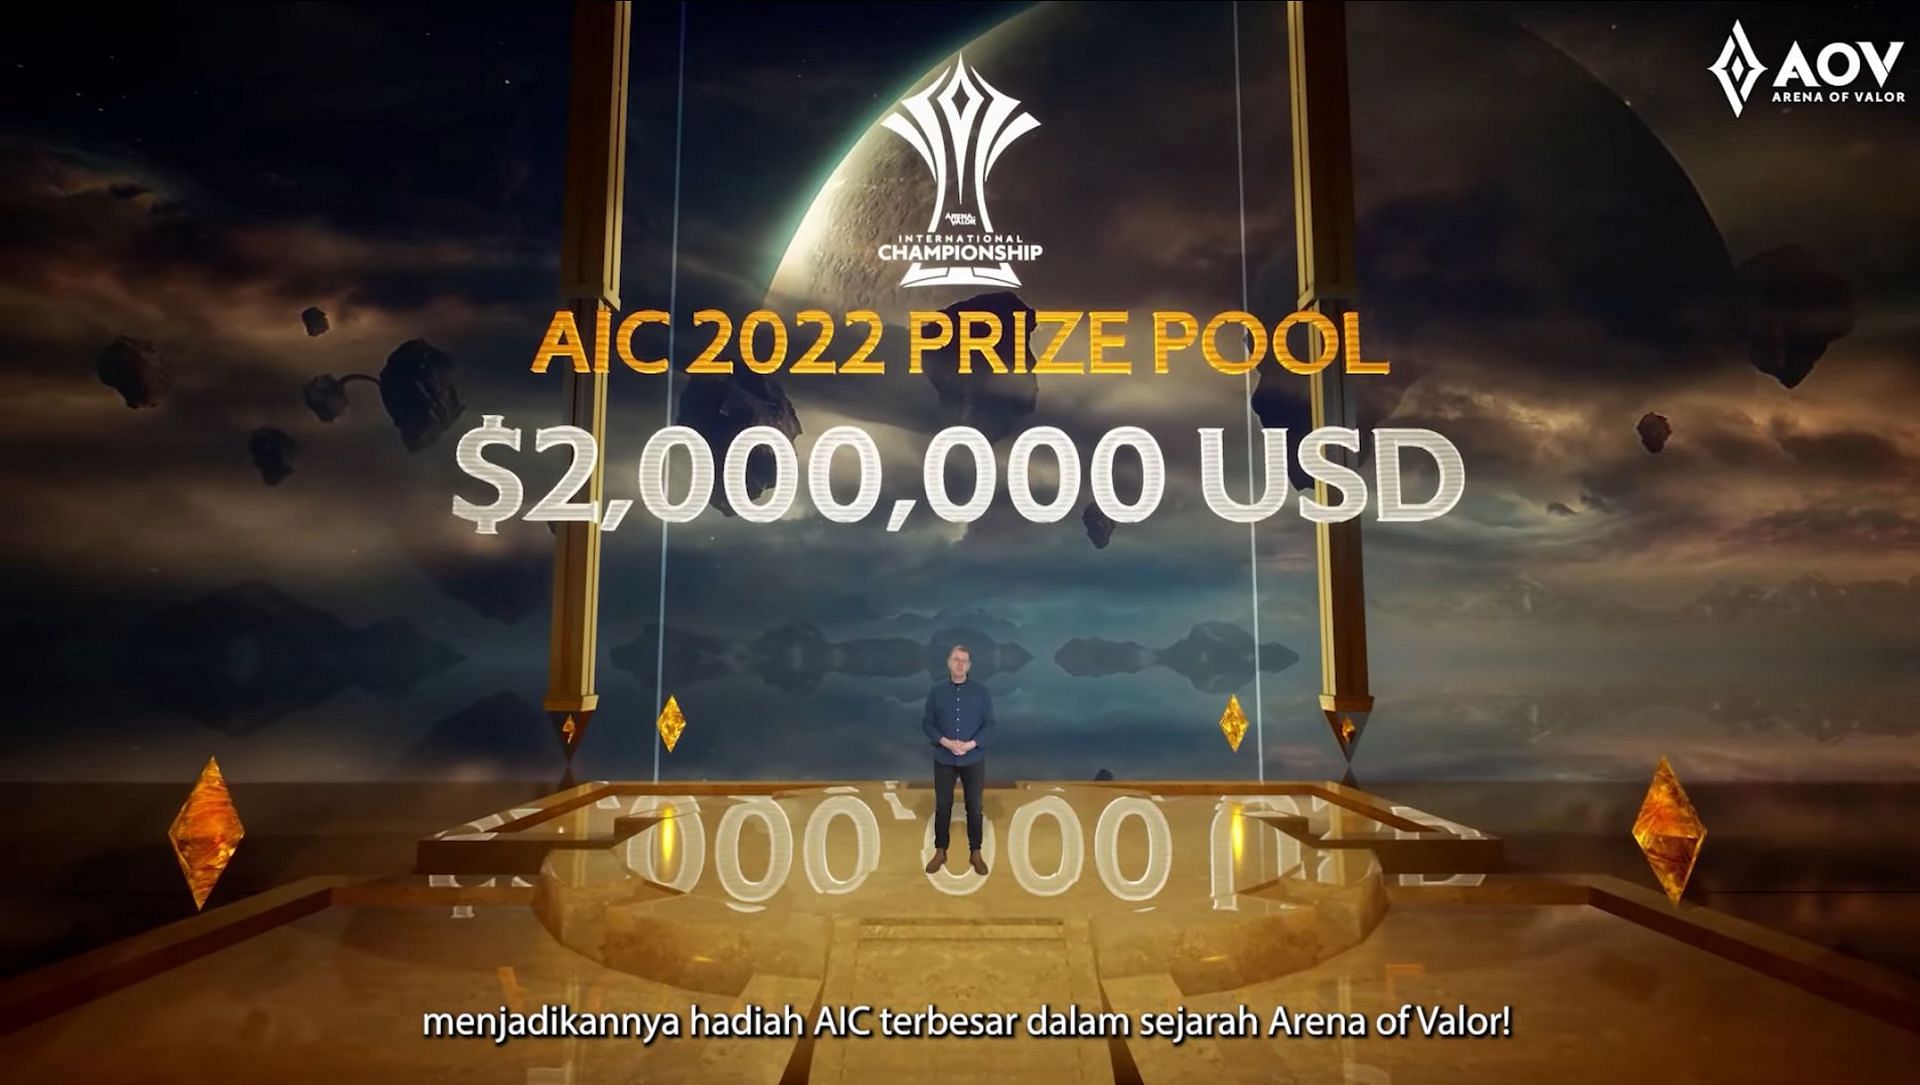 The Arena of Valor International Championship 2022 will feature a prize pool of $2 million (Image via AoV)